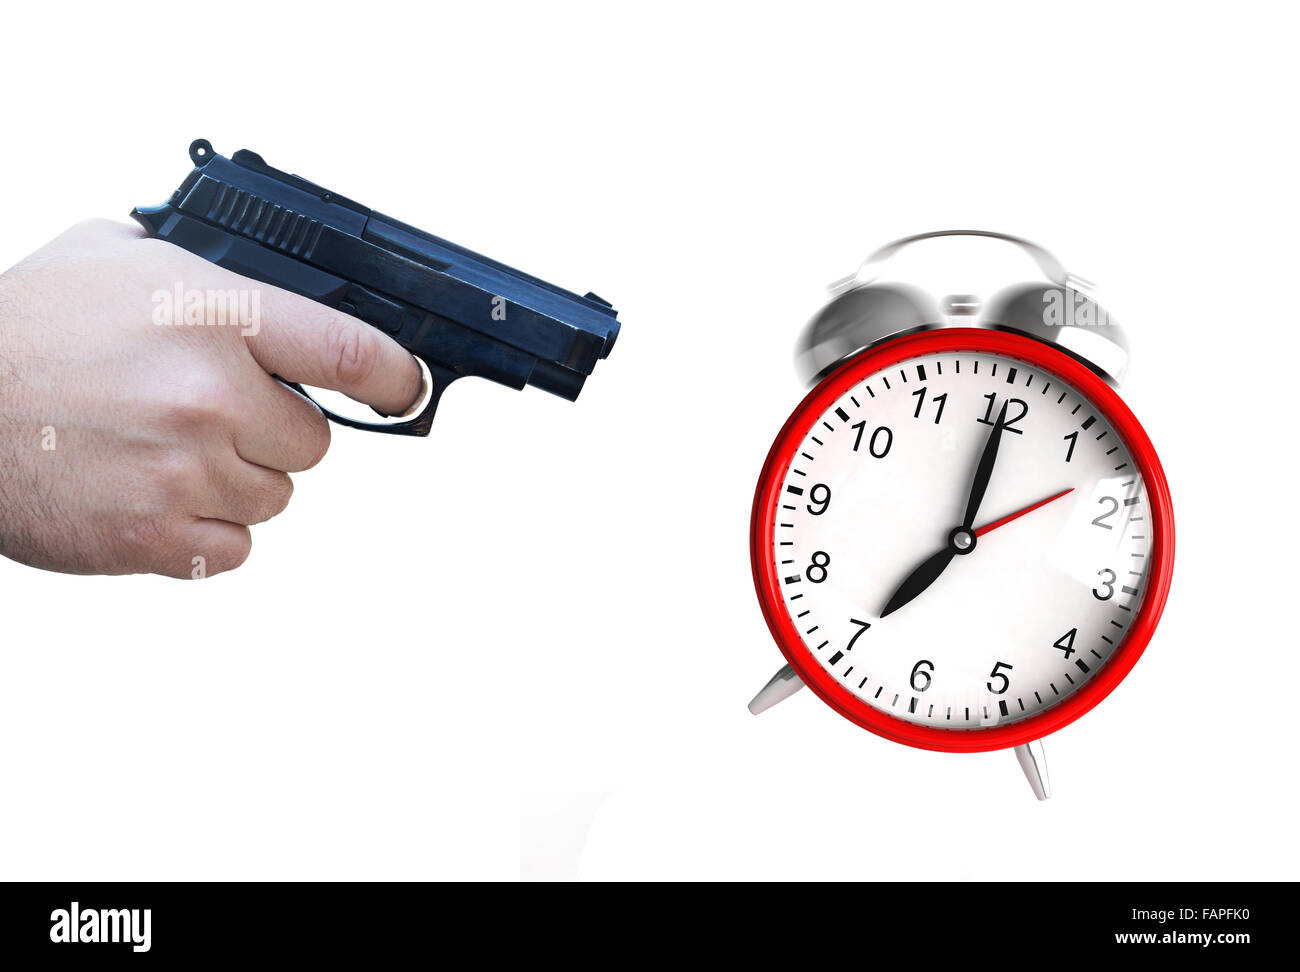 A hand with pistol ready to fire at an ringing clock Stock Photo